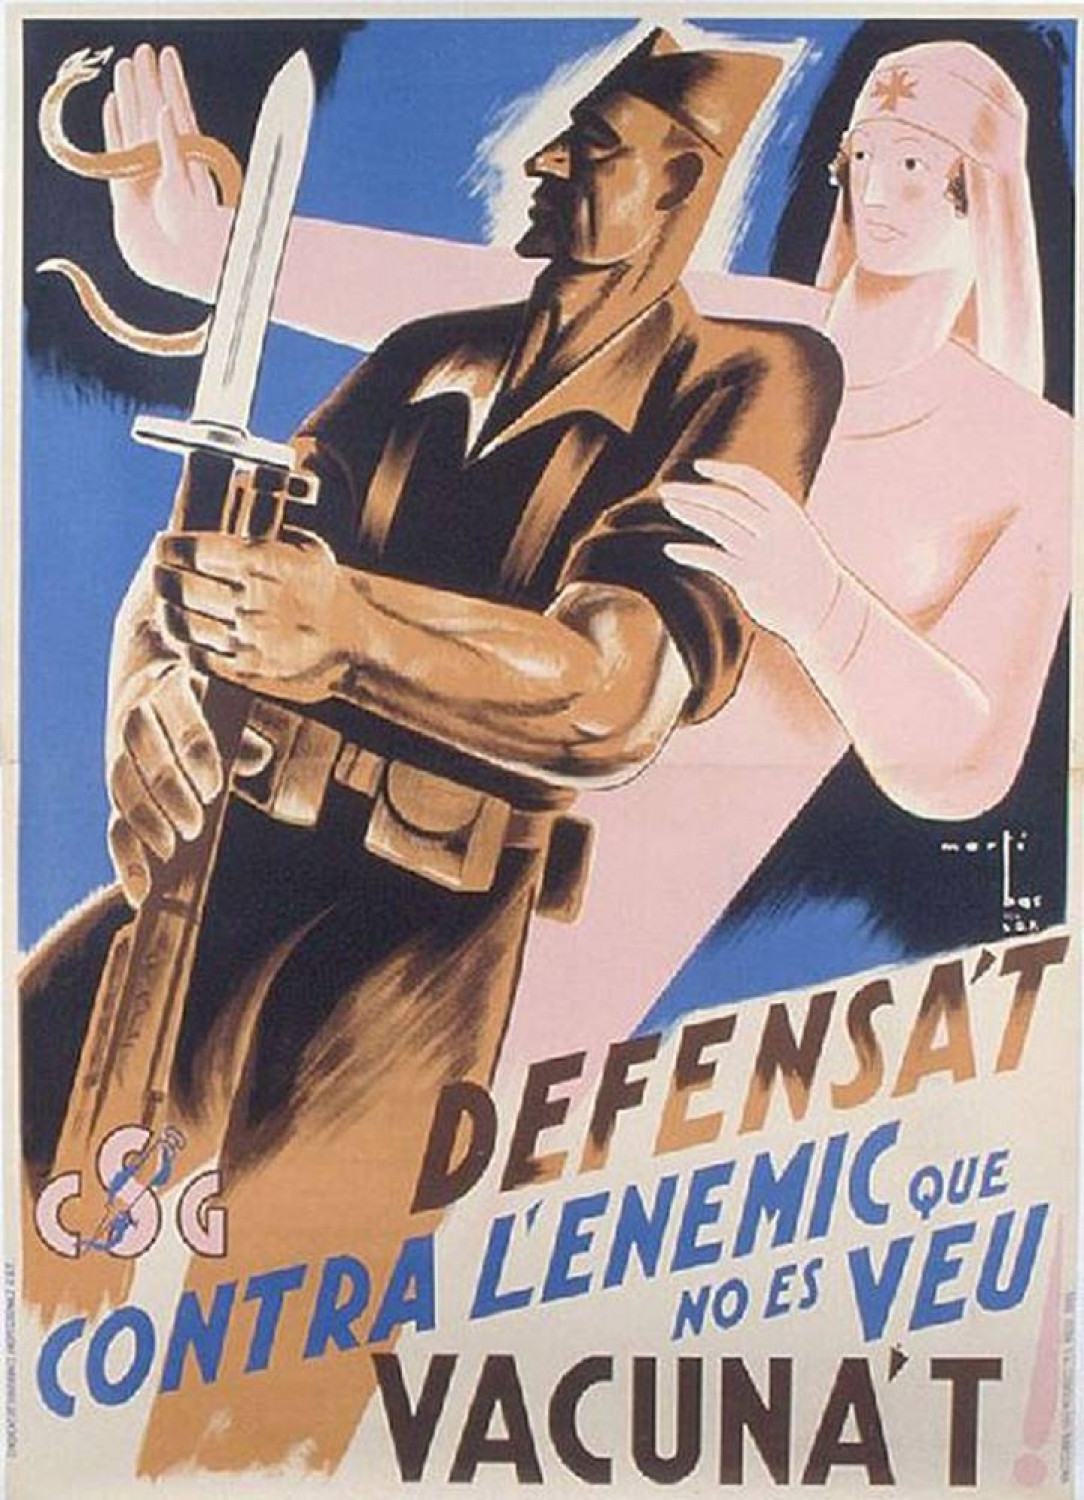 Defend yourself against the enemy that cannot be seen - Get vaccinated (Martí Bas i Blasi, circa 1937)